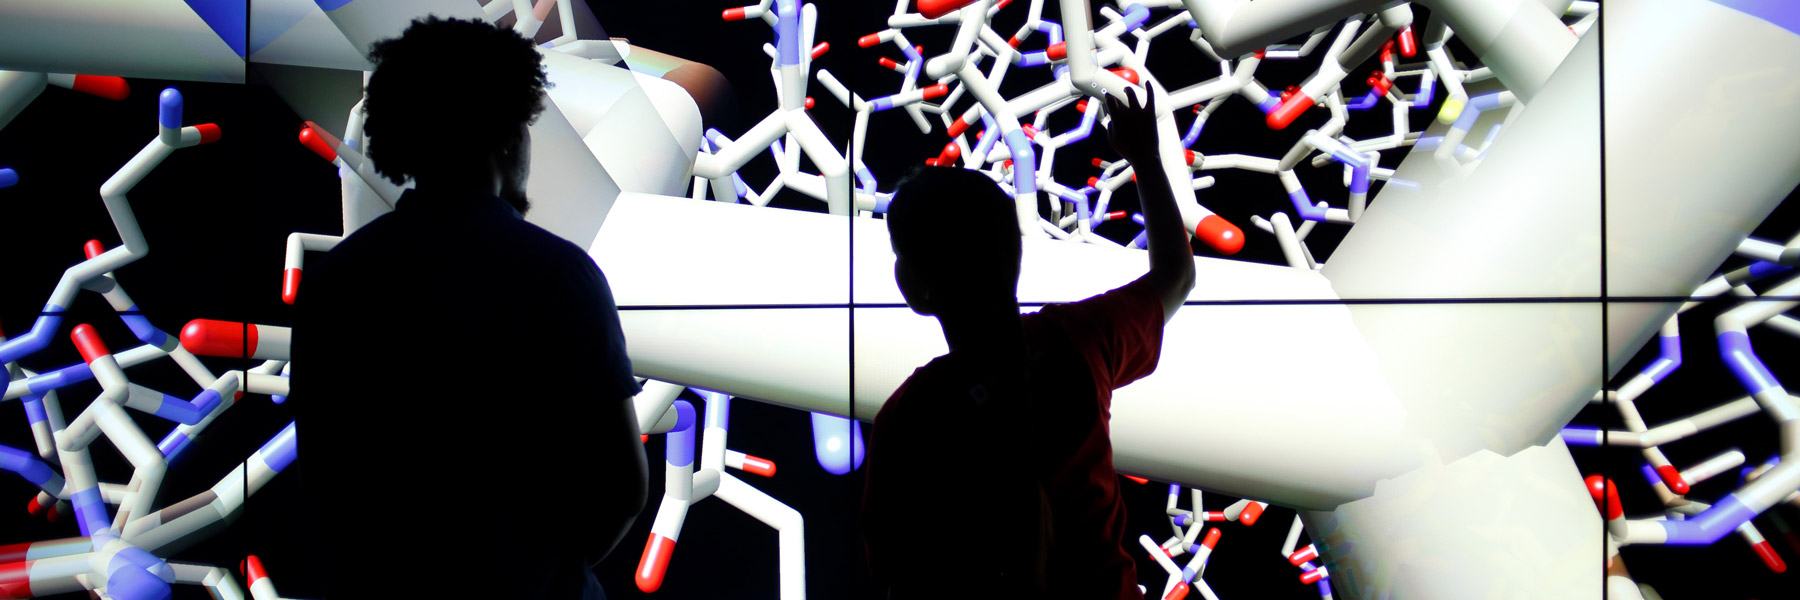 Two people standing in front of an large interactive screen